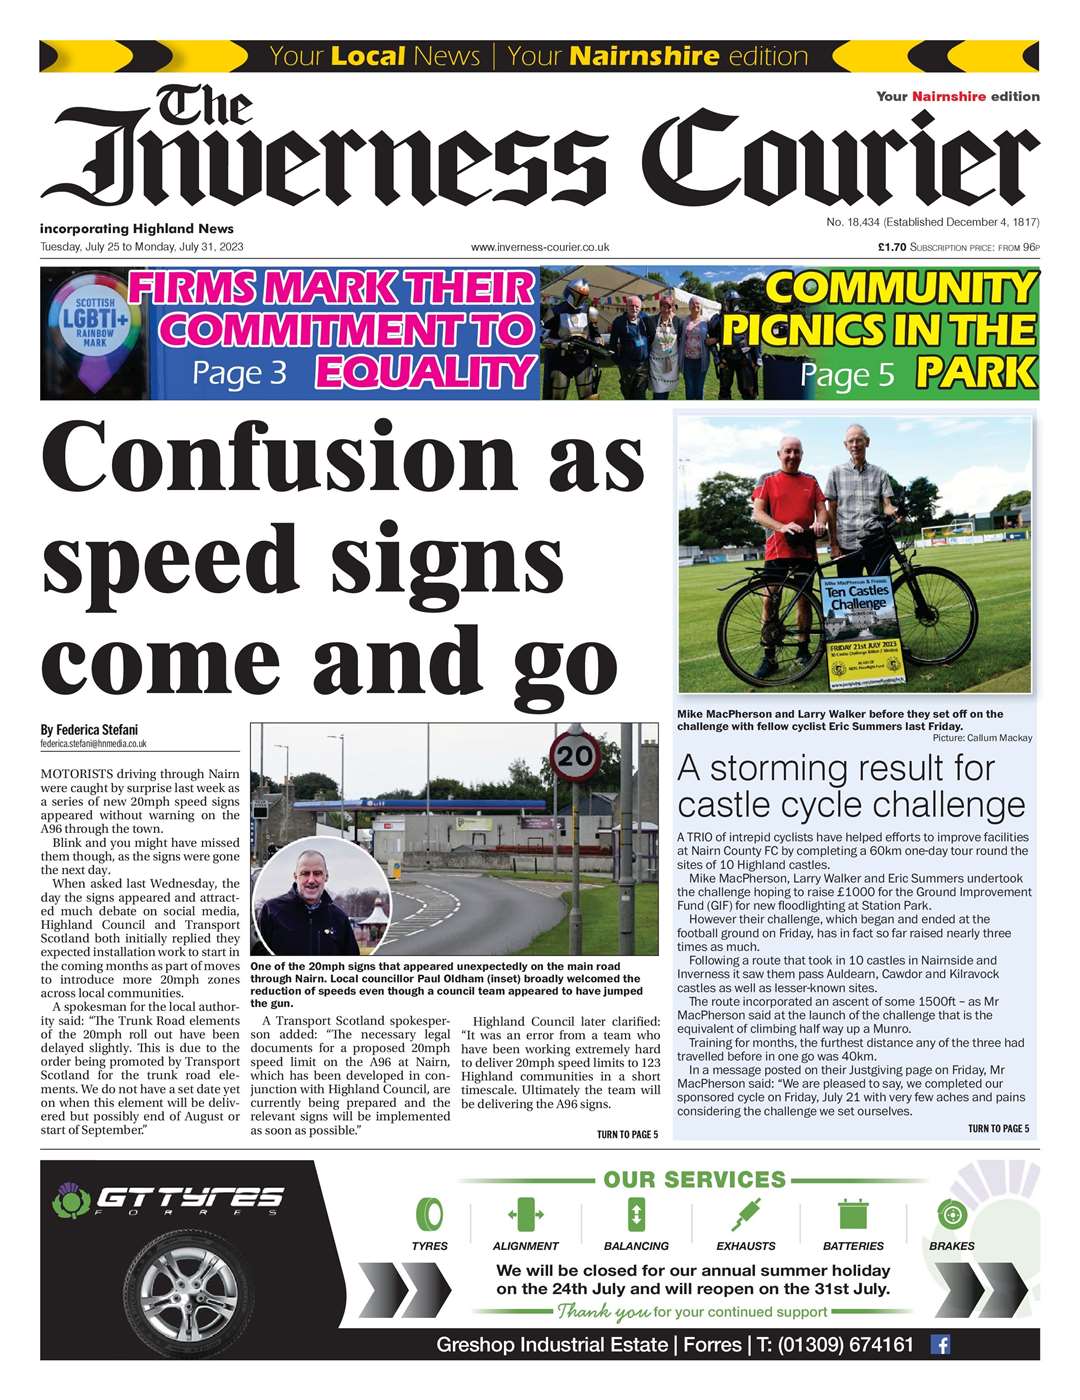 The Inverness Courier (Nairnshire edition), July 25, front page.